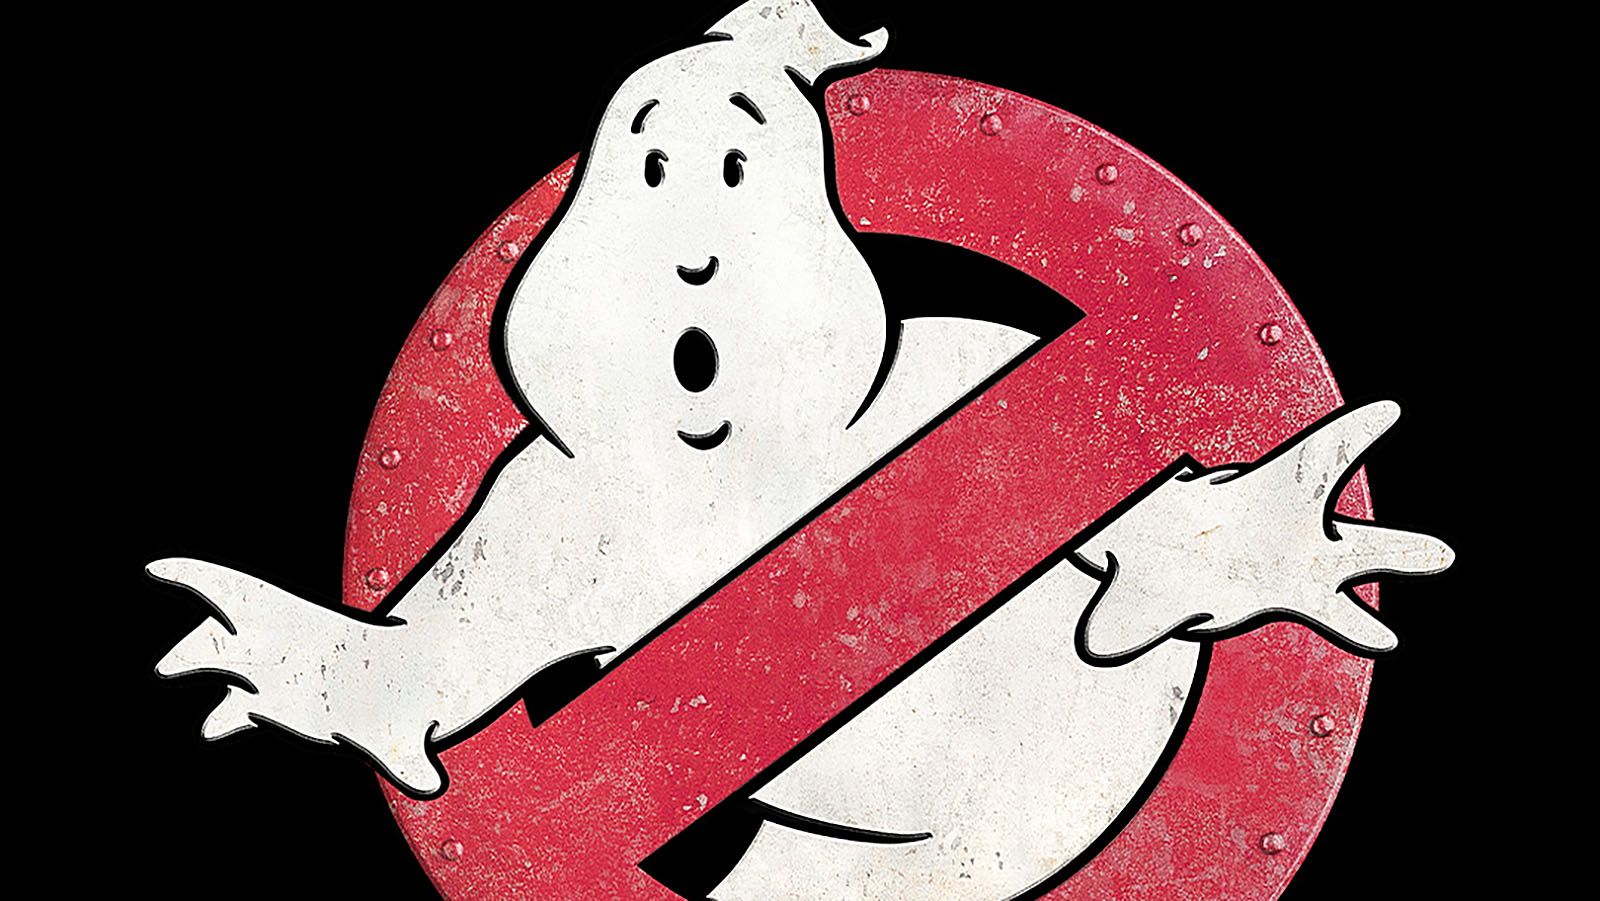 "Ghostbusters" will be shown at Eckhart Park on Oct. 7.